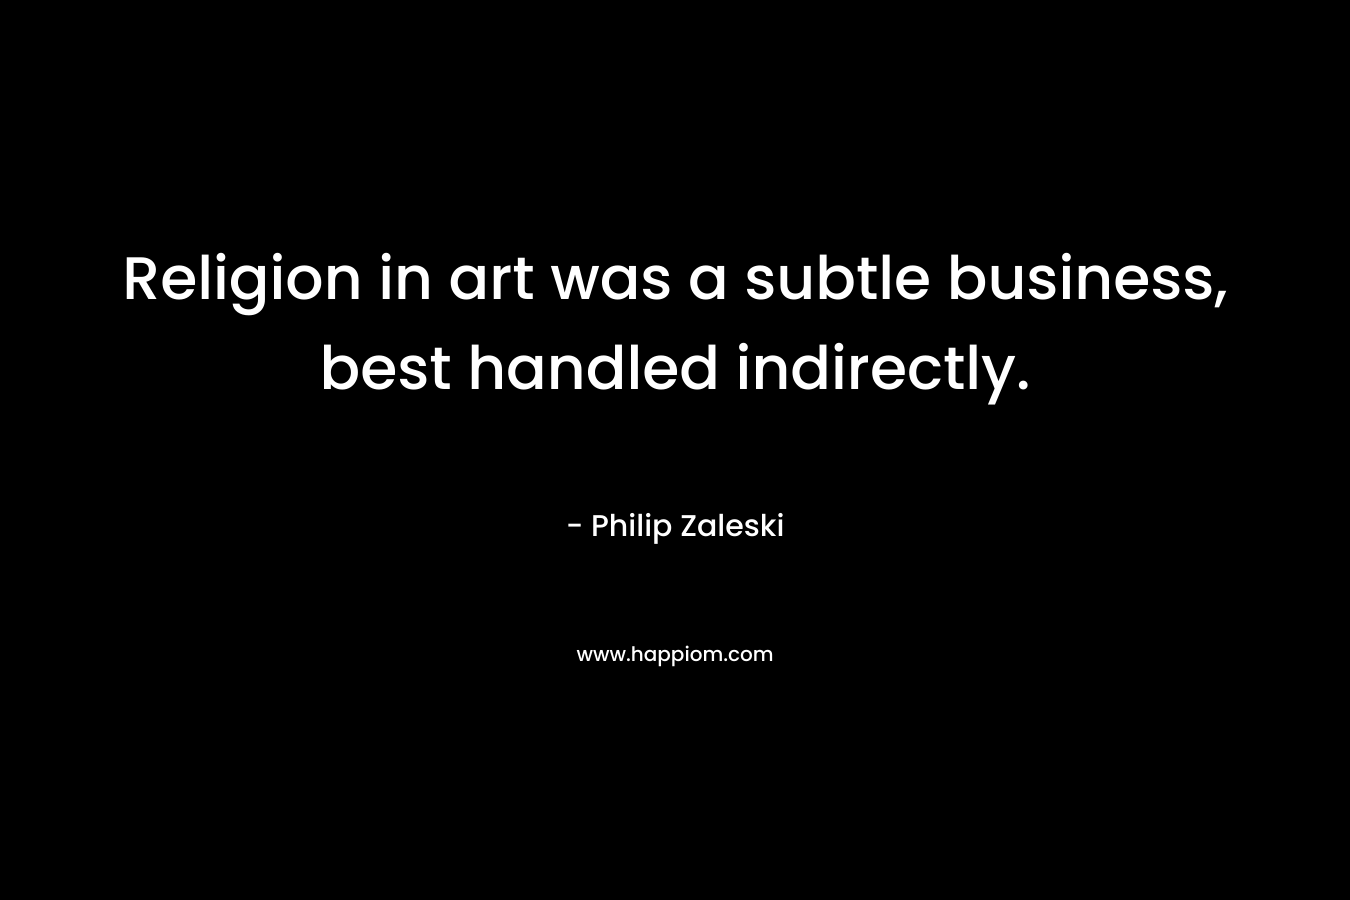 Religion in art was a subtle business, best handled indirectly.